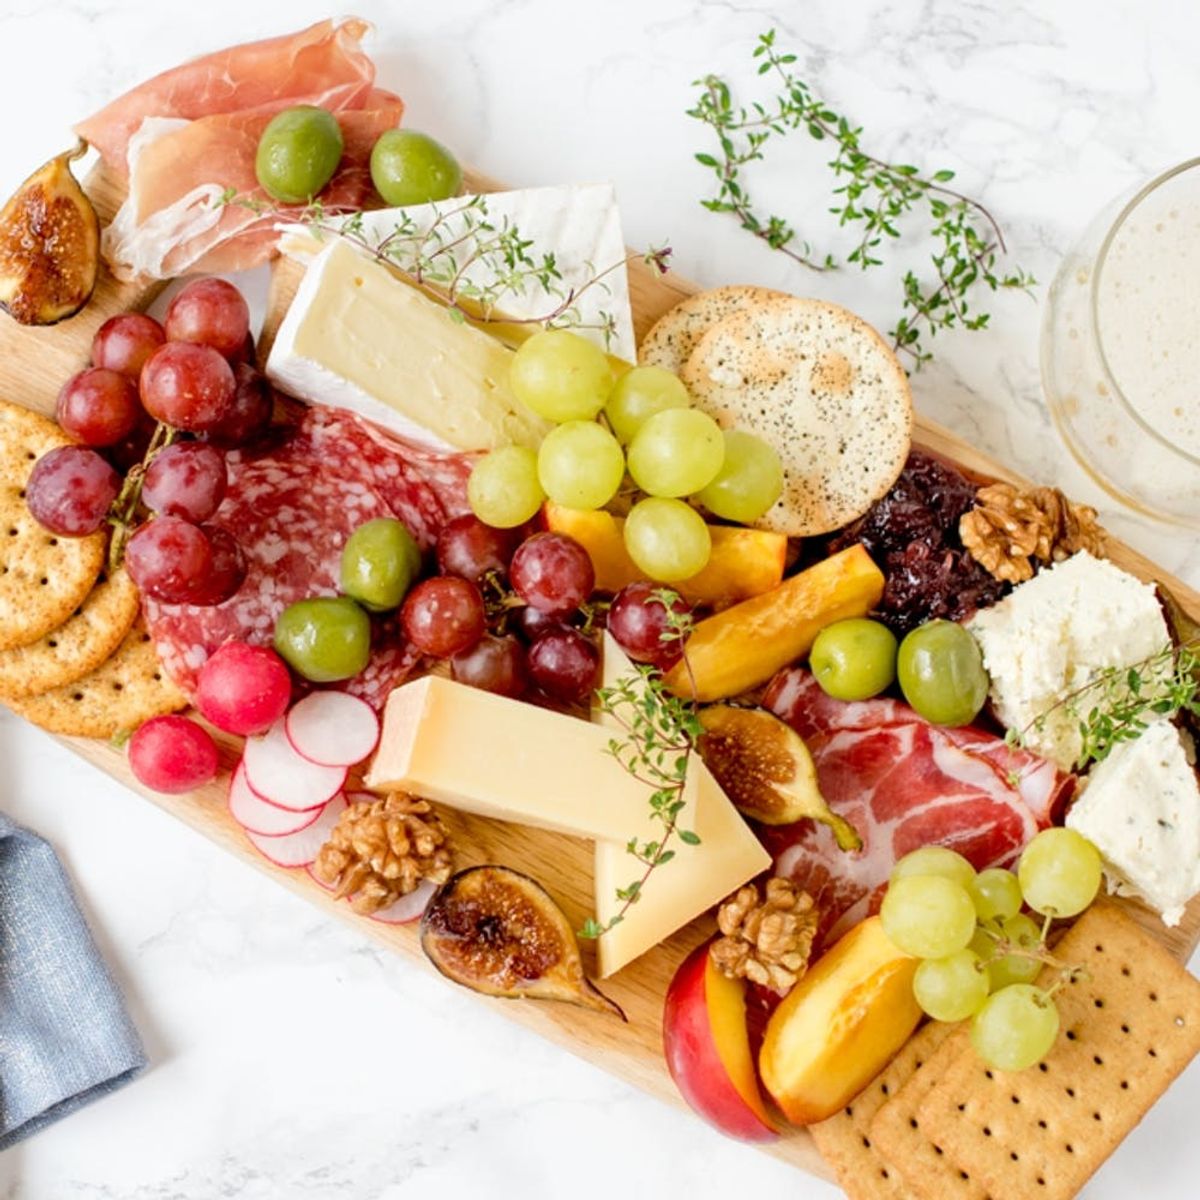 Who Cares About Sharing? This Charcuterie Feast Is for ONE!